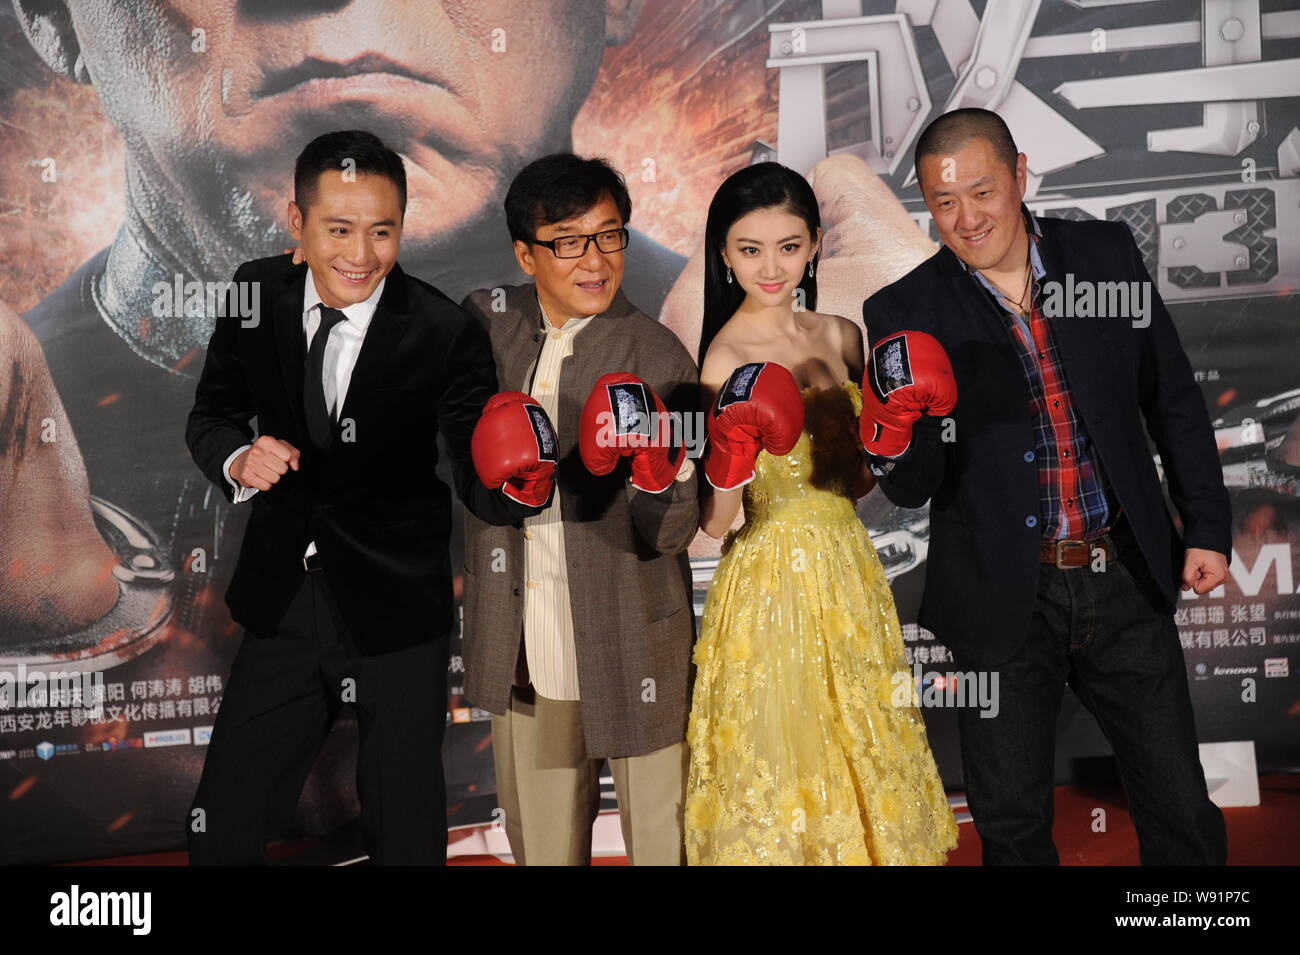 (From left) Chinese actor Liu Ye, Hong Kong actor Jackie Chan, Chinese actress Jing Tian and director Ding Sheng pose at a premiere for their new movi Stock Photo